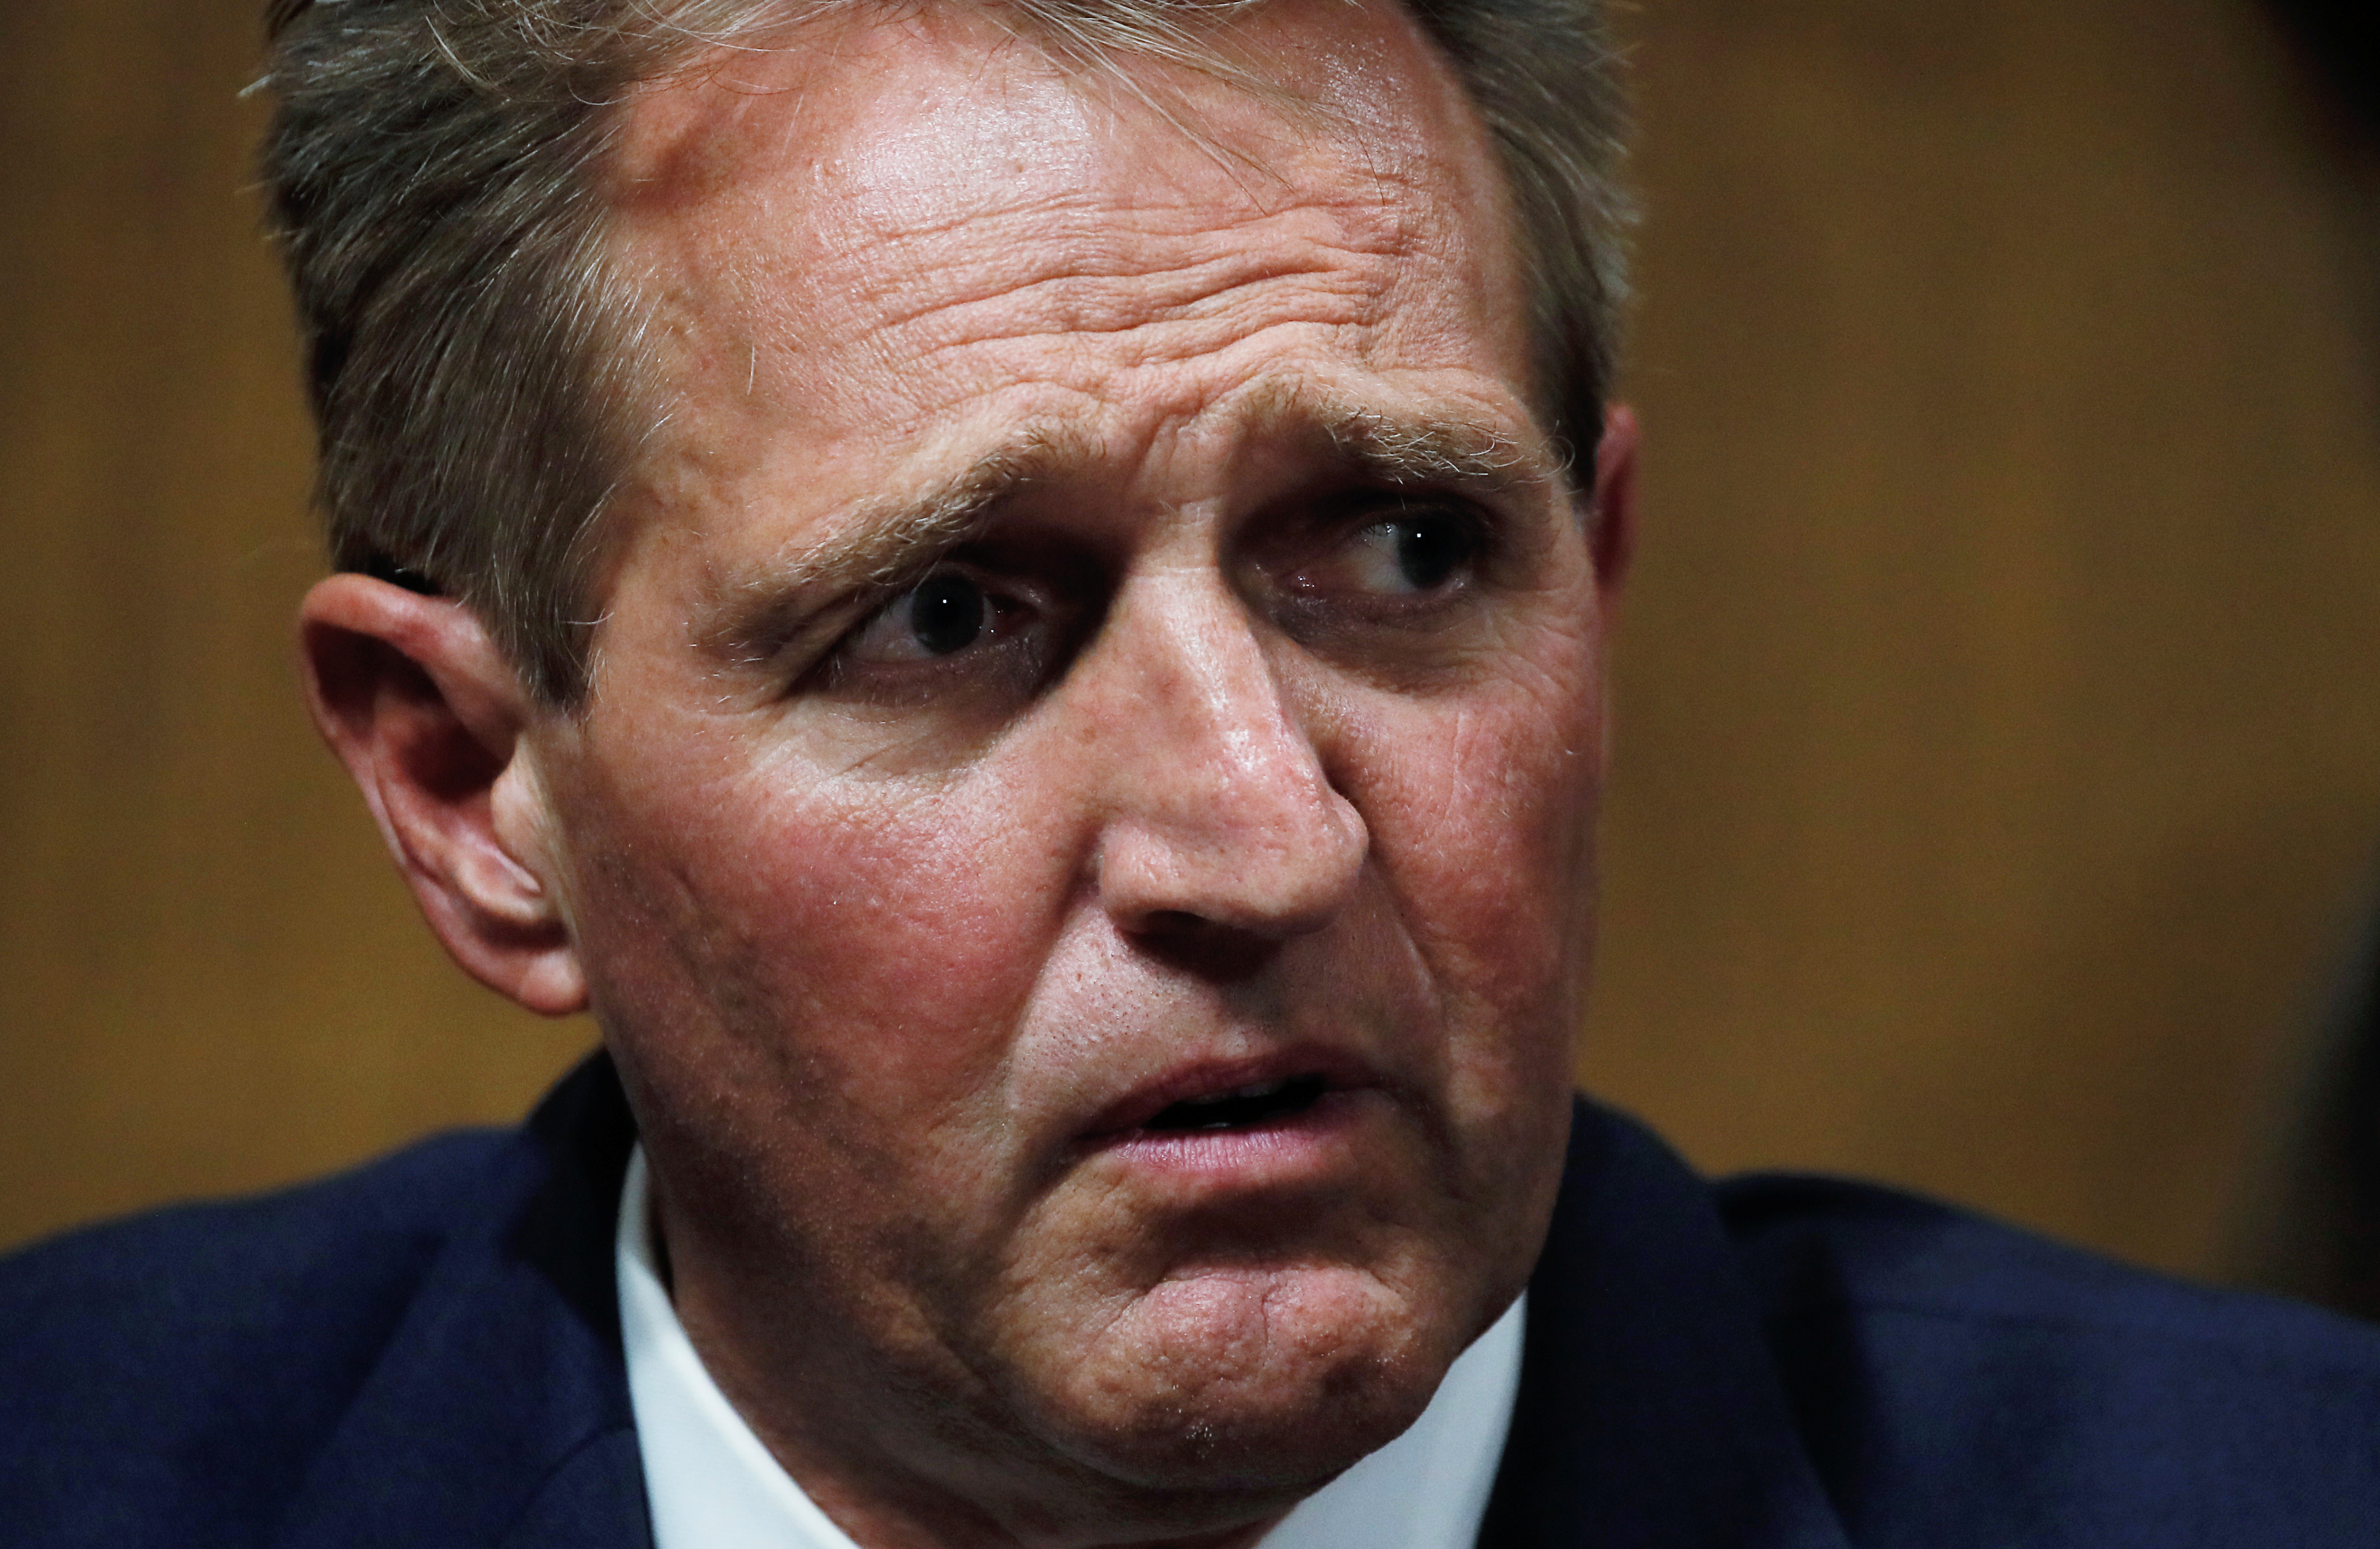 Senate Judiciary Committee member Senator Flake explains conditions of his yes vote on Kavanaugh nomination during a Judiciary Committee meeting on Capitol Hill in Washington